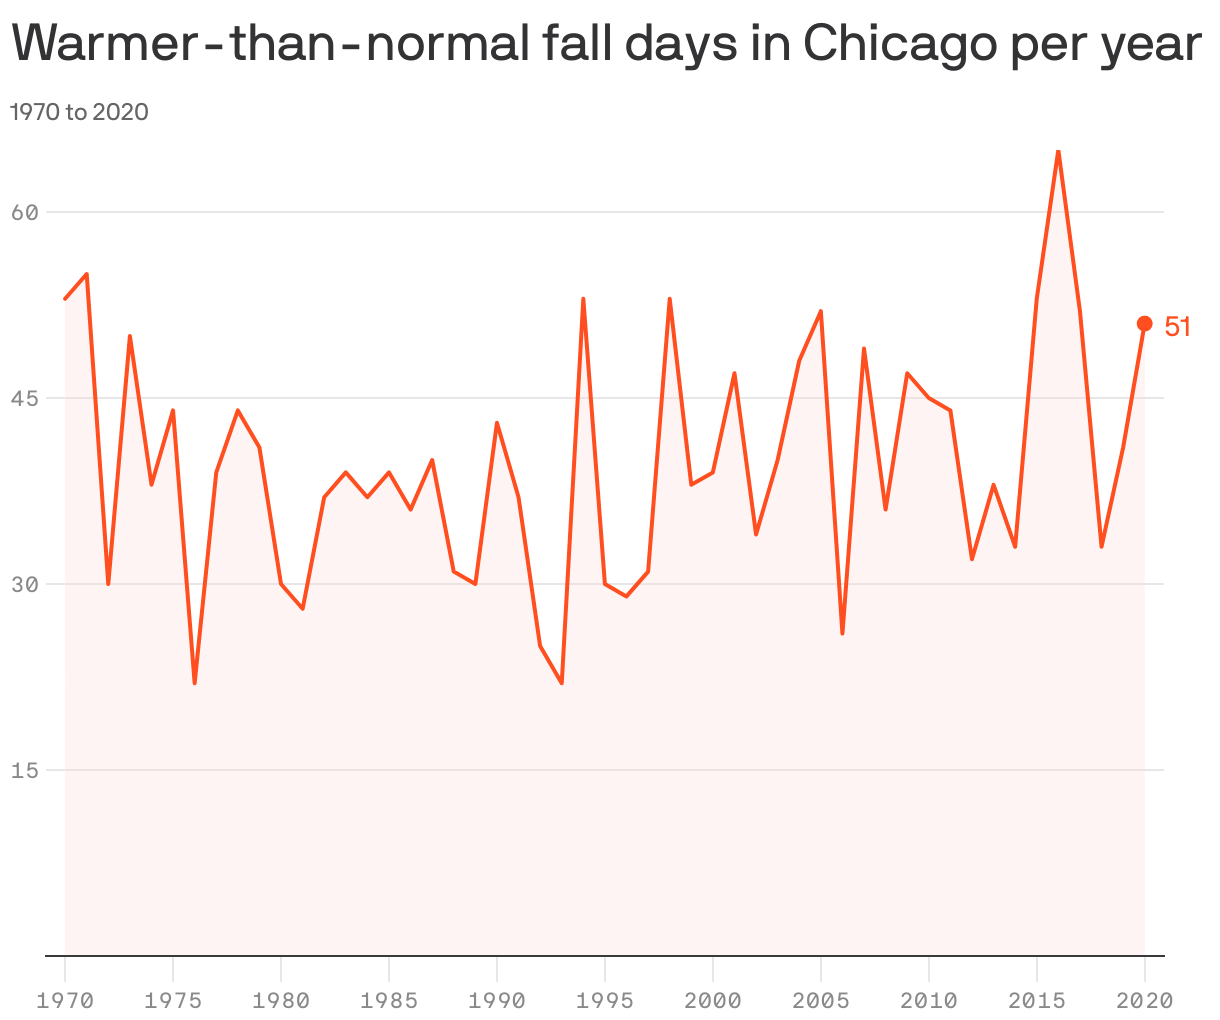 Warmer-than-normal fall days in Chicago per year